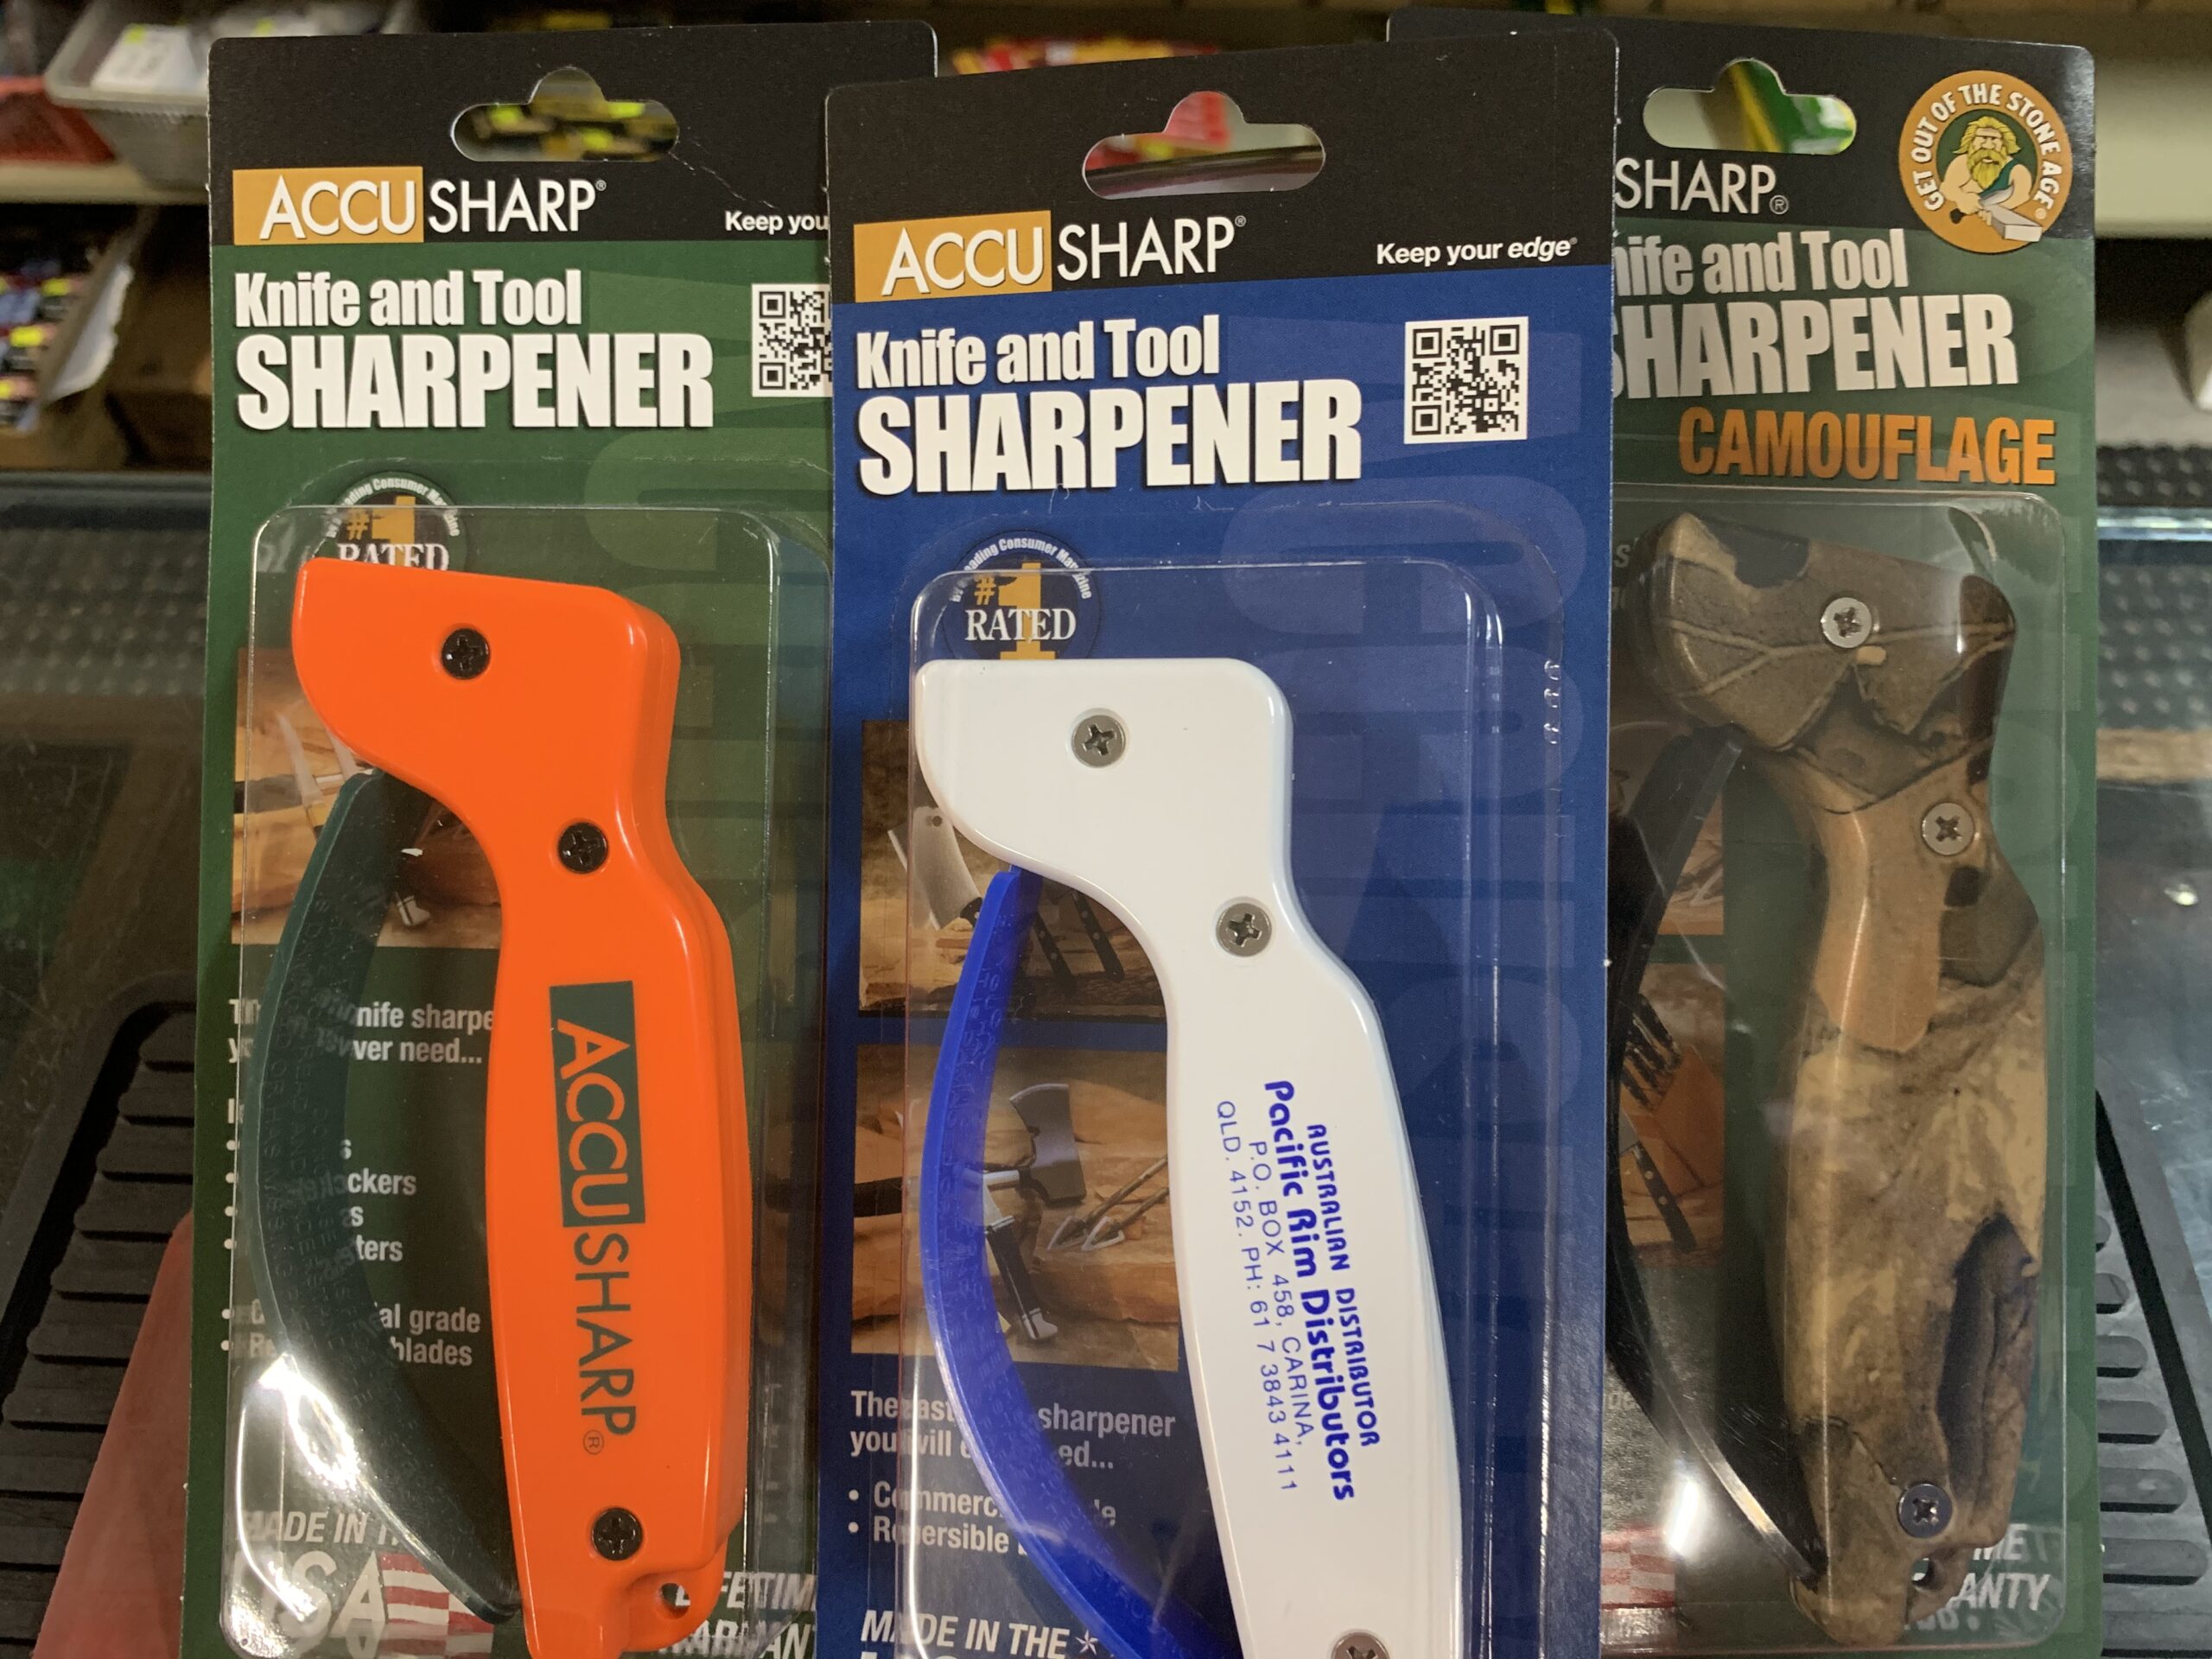 Accusharp Knife and Tool sharpener select your colour choice